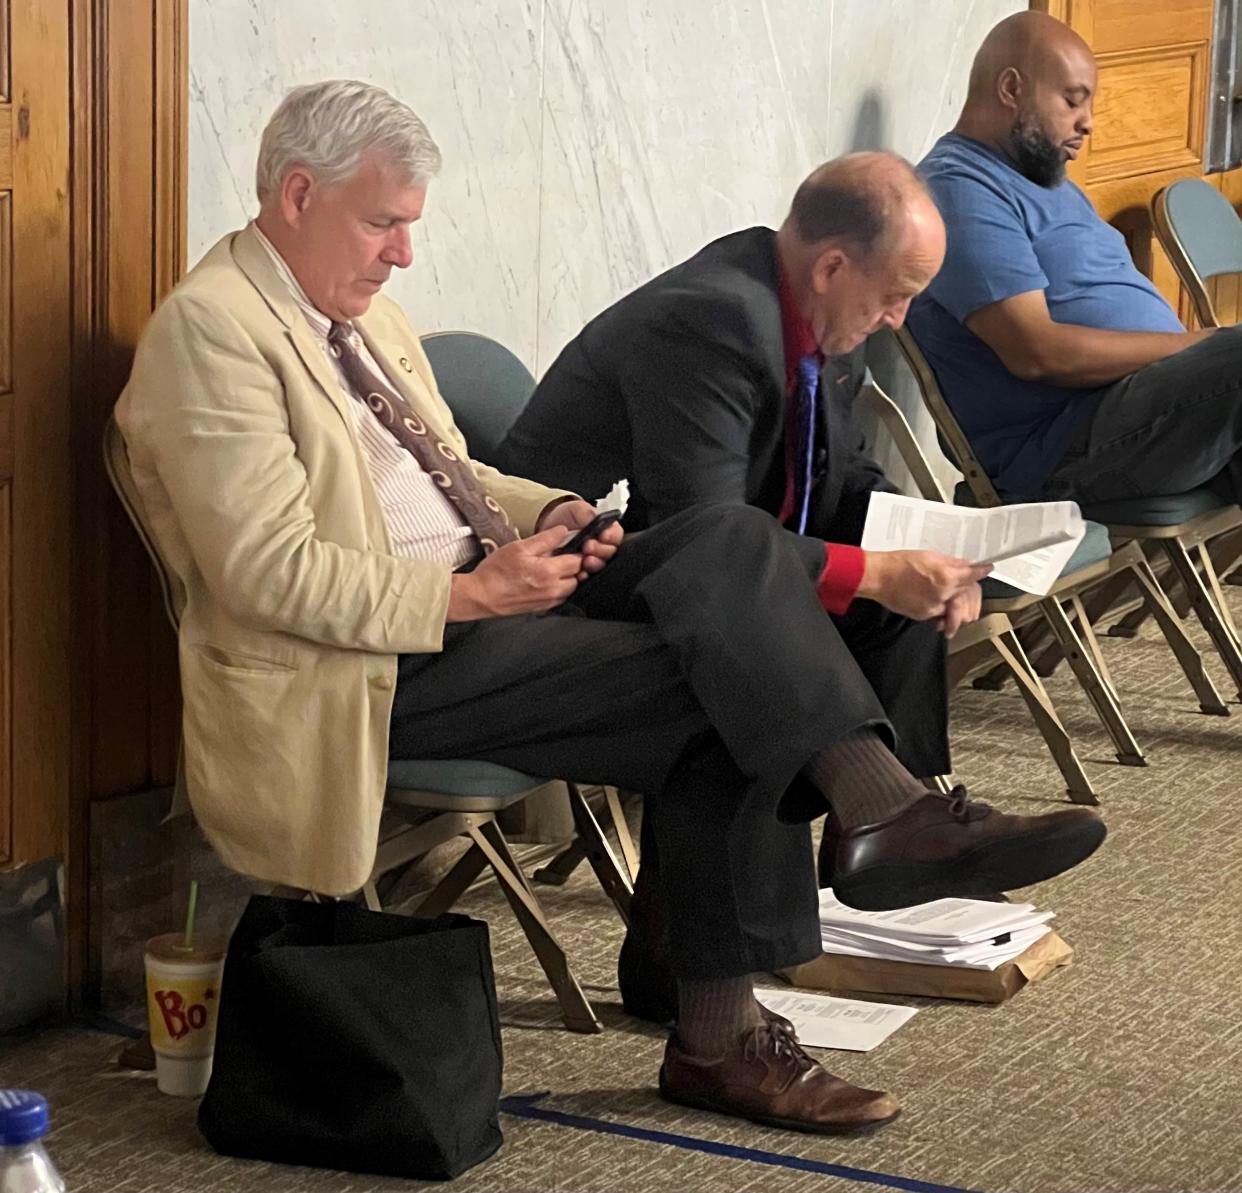 Former lawmaker Tom Brinkman and his attorney Curt Hartman prepare for a hearing before Cincinnati City Council. Brinkman, with Hartman as his attorney, won a case against the Cincinnati Southern Raiway Board that alleged the board met in secret to hash out to the deal to potentially sell the railroad